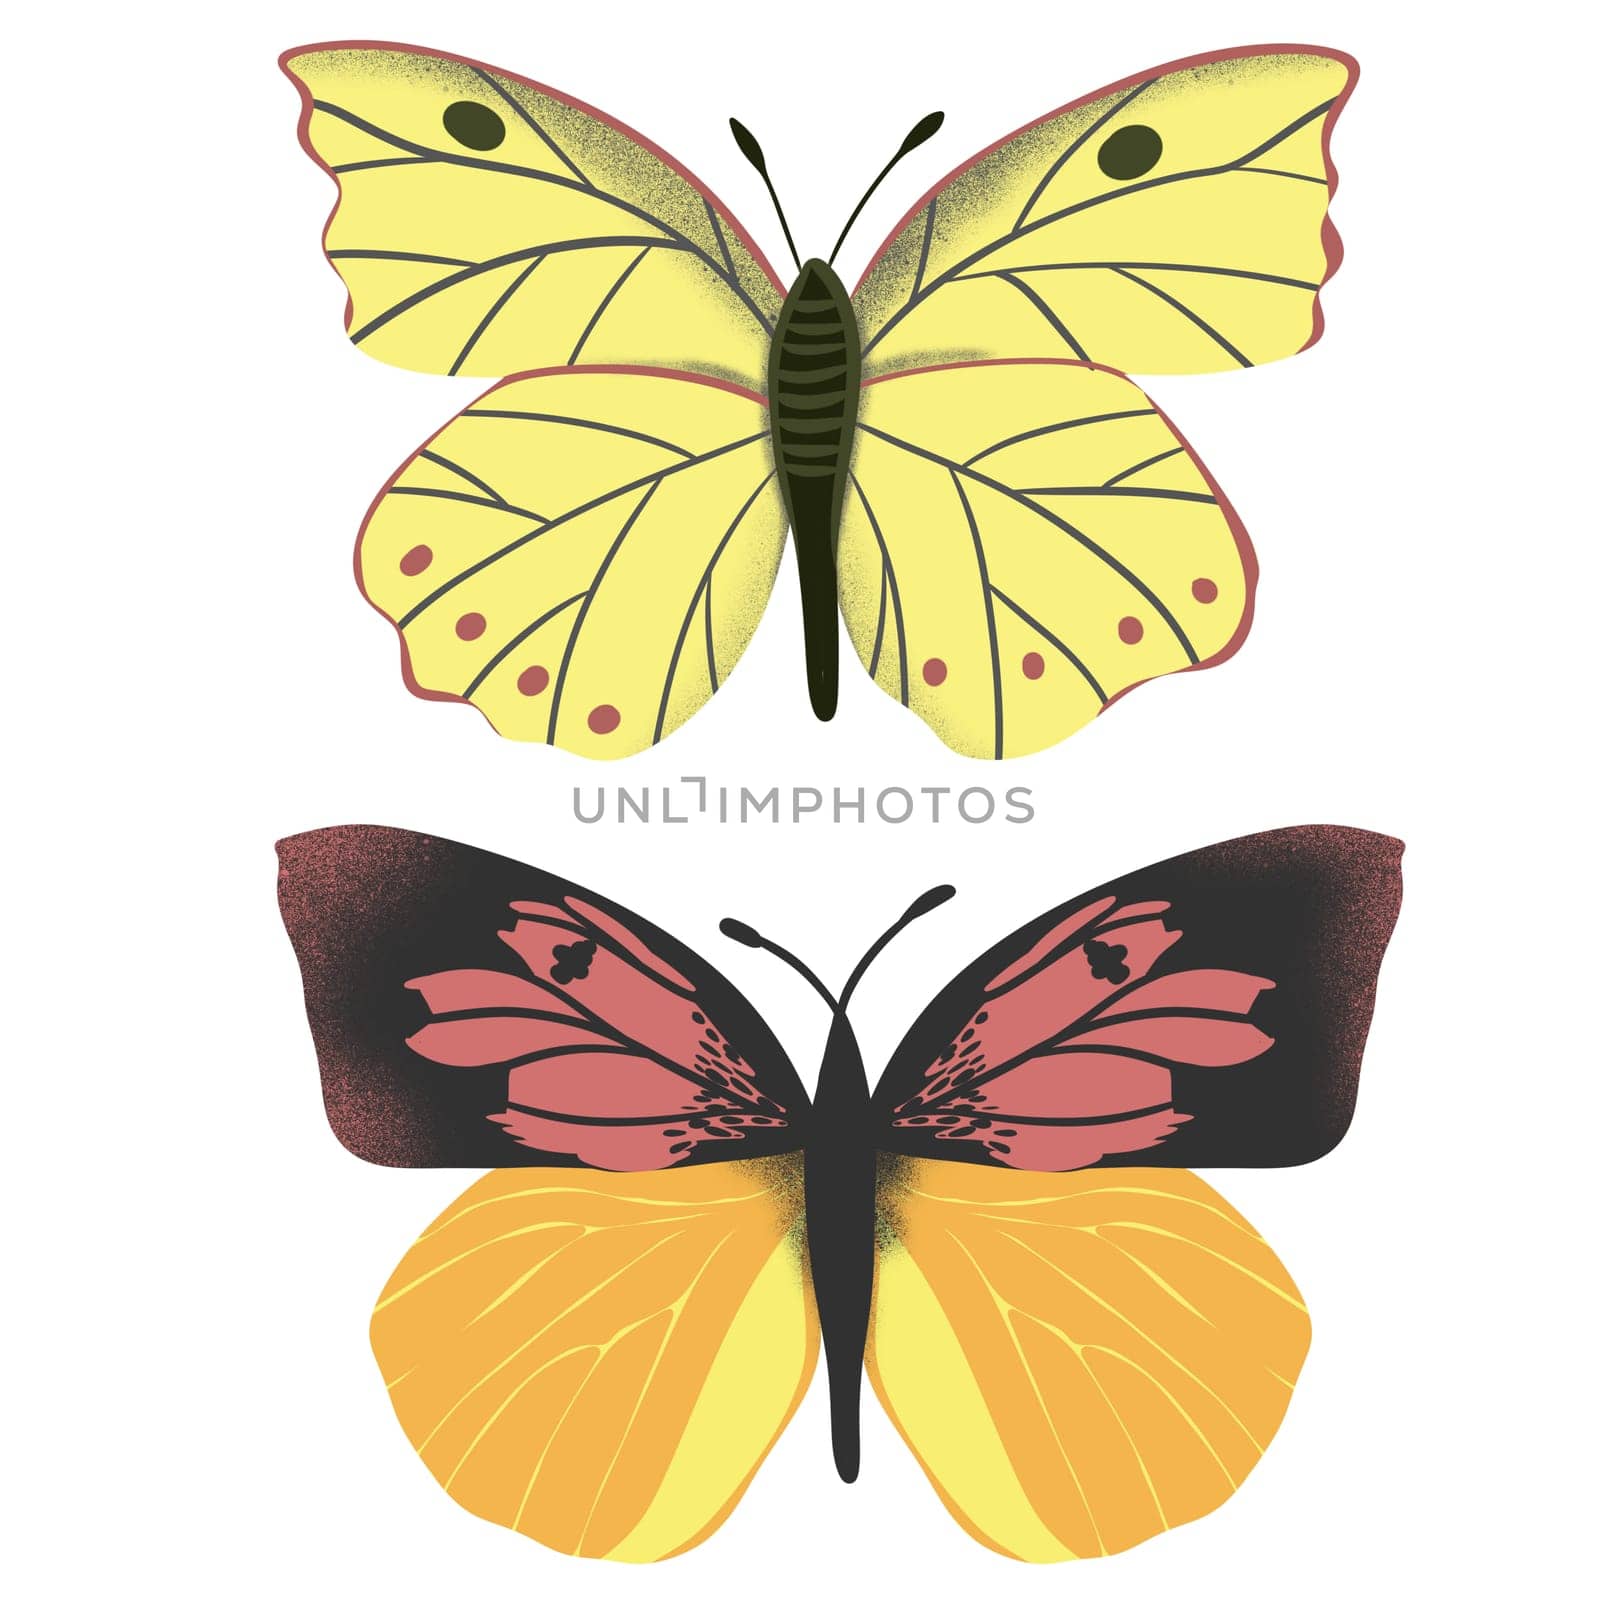 Hand drawn illustration of california dogface butterfly Zerene eurydice, state insect symbol. Biology zoology bug concept, natural meadow forest decor, yellow orange wings with spots, drawing sketch